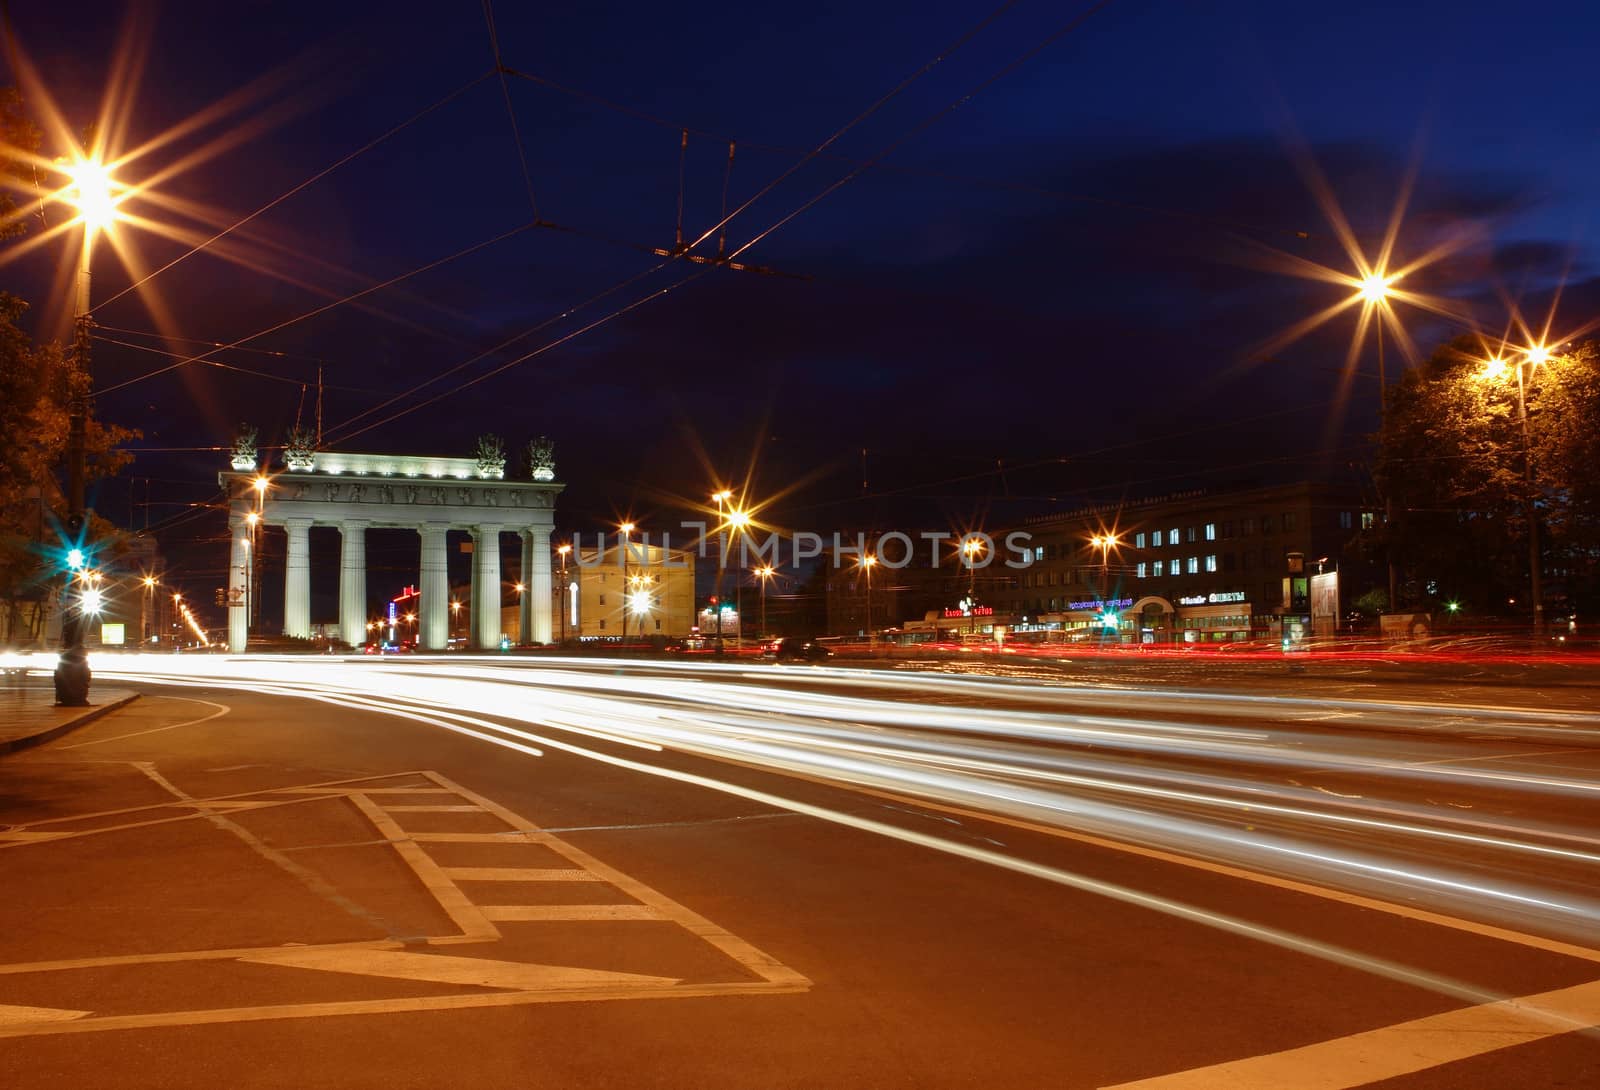 St-Petersburg, Russia: Moskovsky avenue, Moscow gate, night. ST-PETERSBURG, RUSSIA - SEPTEMBER 25: Moskovsky Prospekt, Moscow gate, night lights, street lights, September 25, 2009, a horizontal picture. by grigvovan